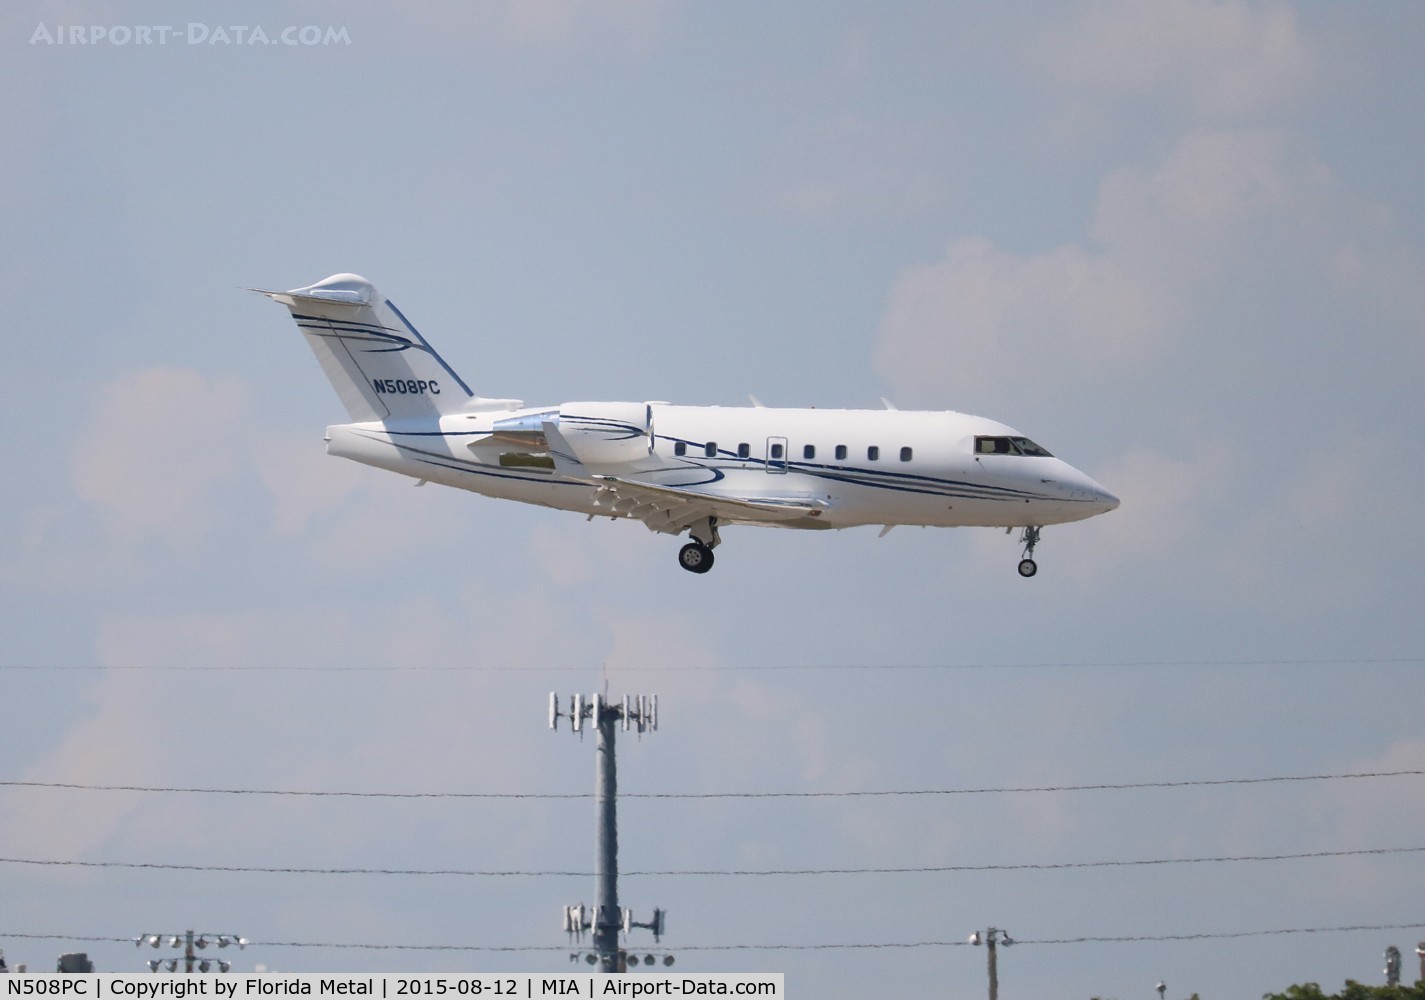 N508PC, 2003 Bombardier Challenger 604 (CL-600-2B16) C/N 5558, Challenger 604